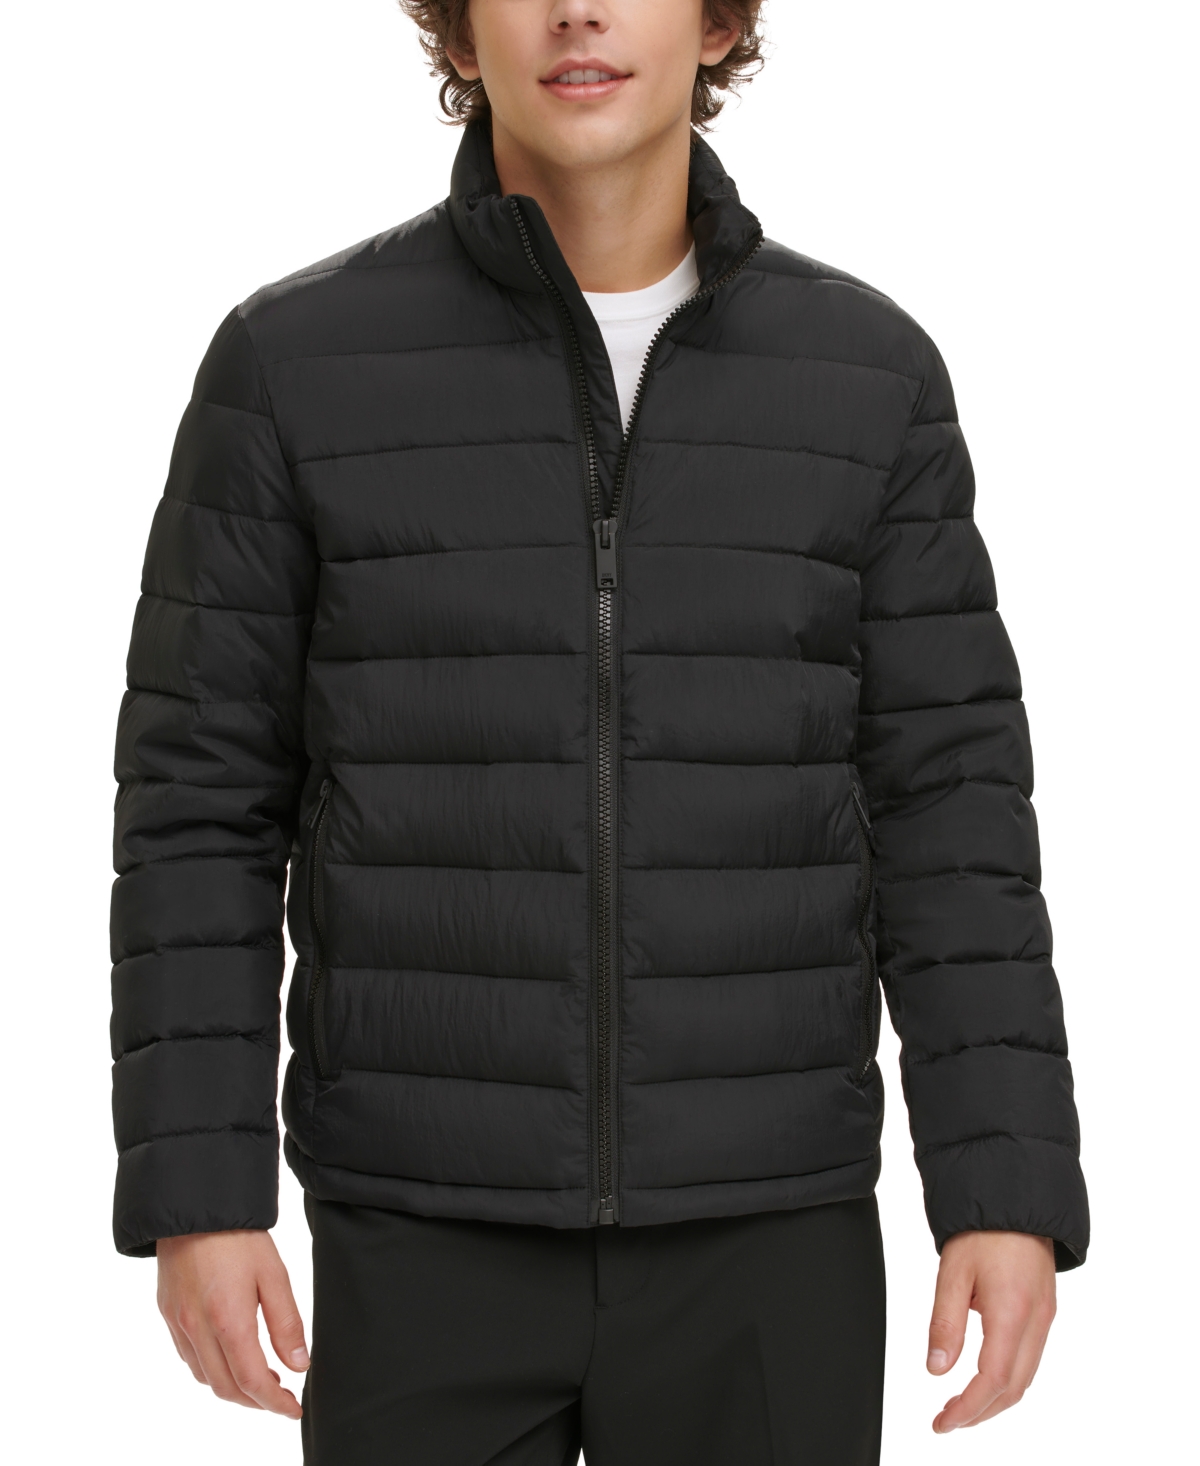 Dkny Men's Quilted Full-zip Stand Collar Puffer Jacket In Black